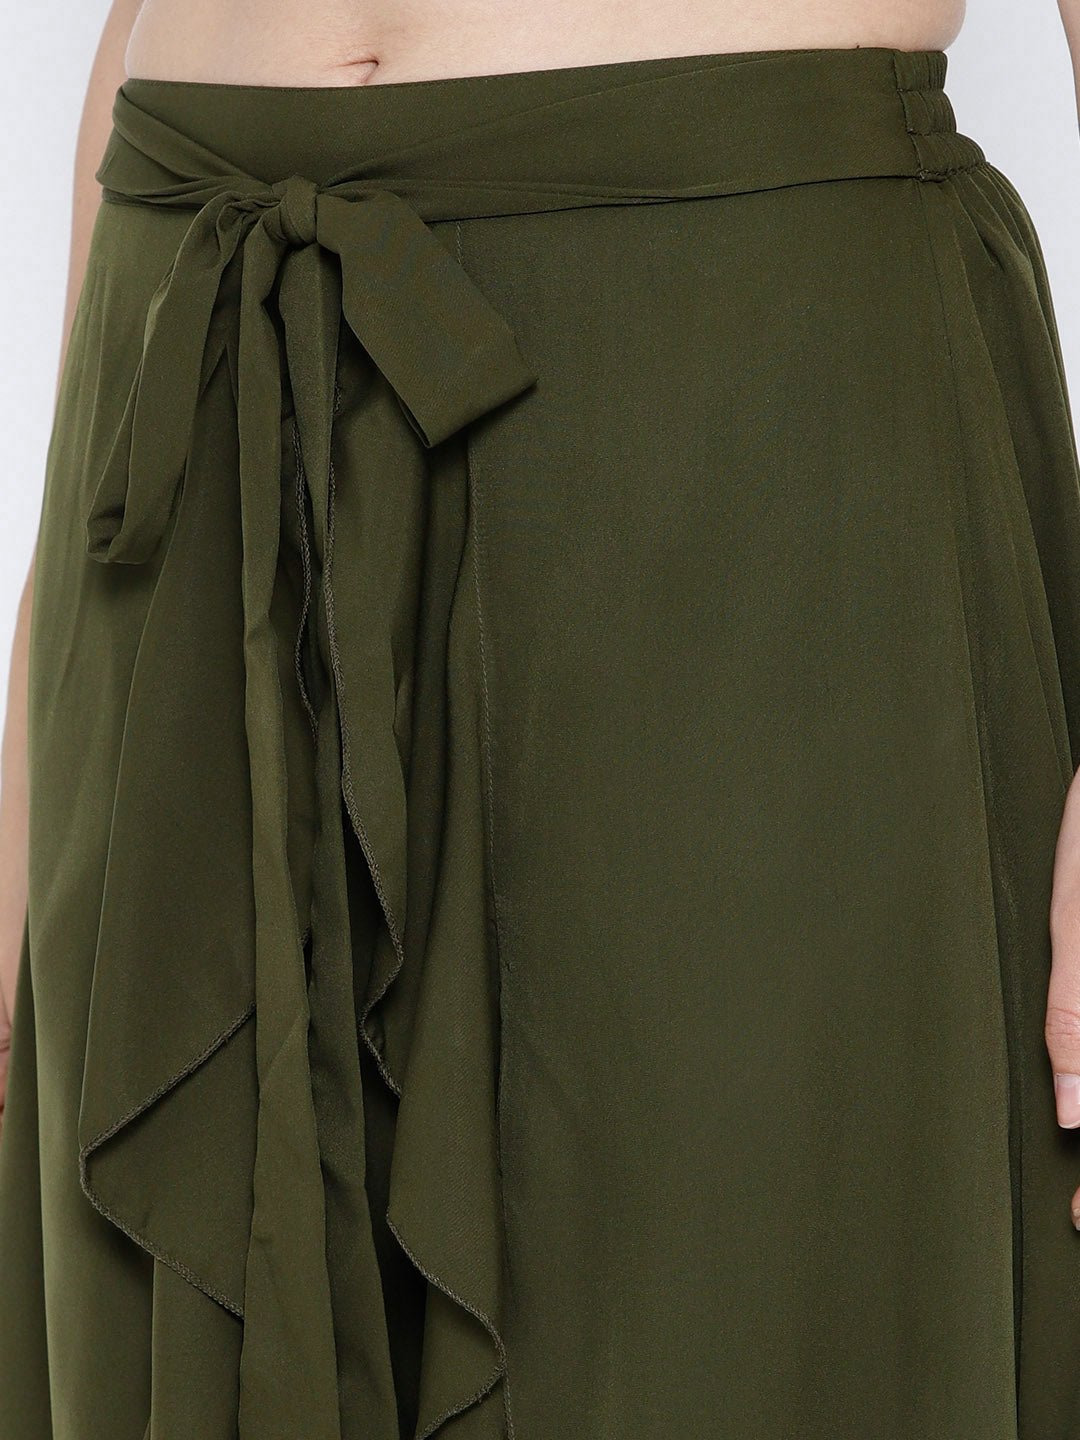 Folk Republic Women Solid Olive Green Waist Tie-Up Ruffled Maxi Skirt with Attached Trousers - #folk republic#